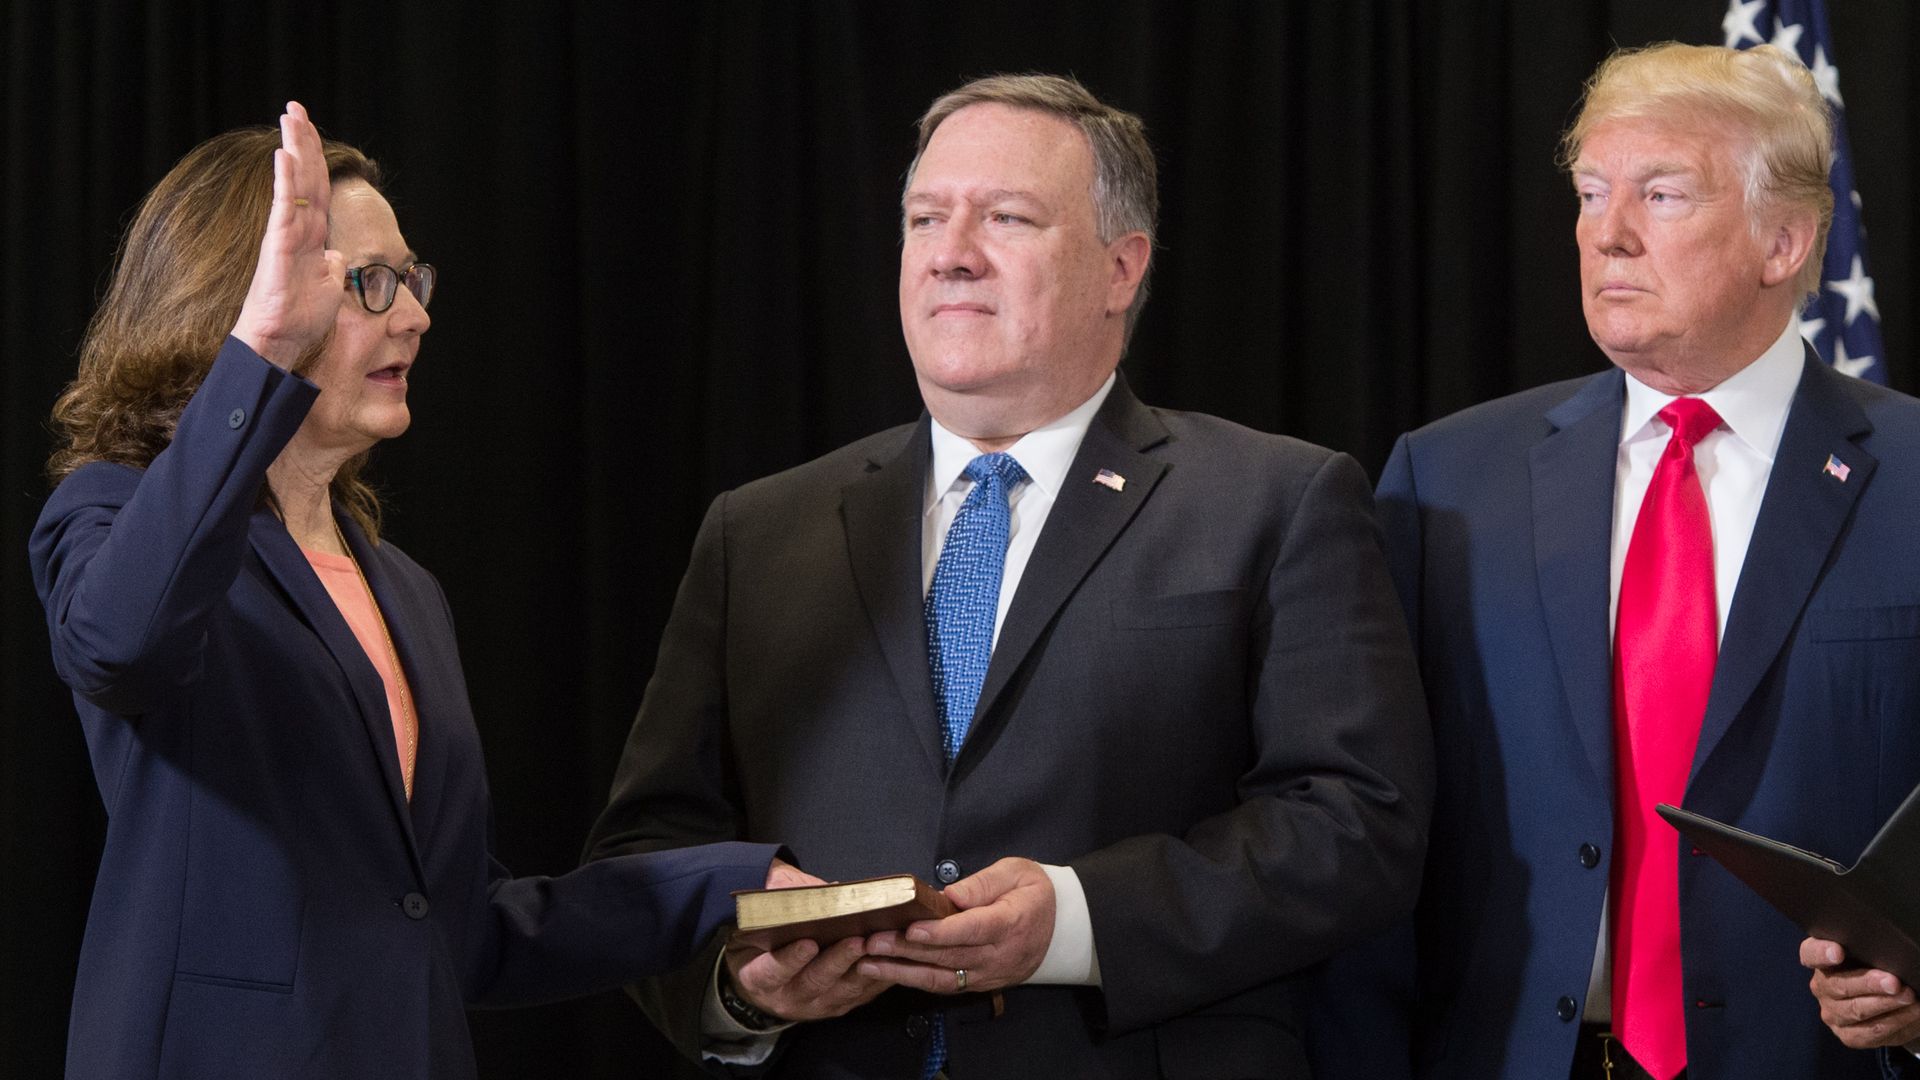 Gina Haspel is sworn in as the Director of the Central Intelligence Agency alongside President Trump and Secretary of State Mike Pompeo in Langley, Virginia, on May 21, 2018. 